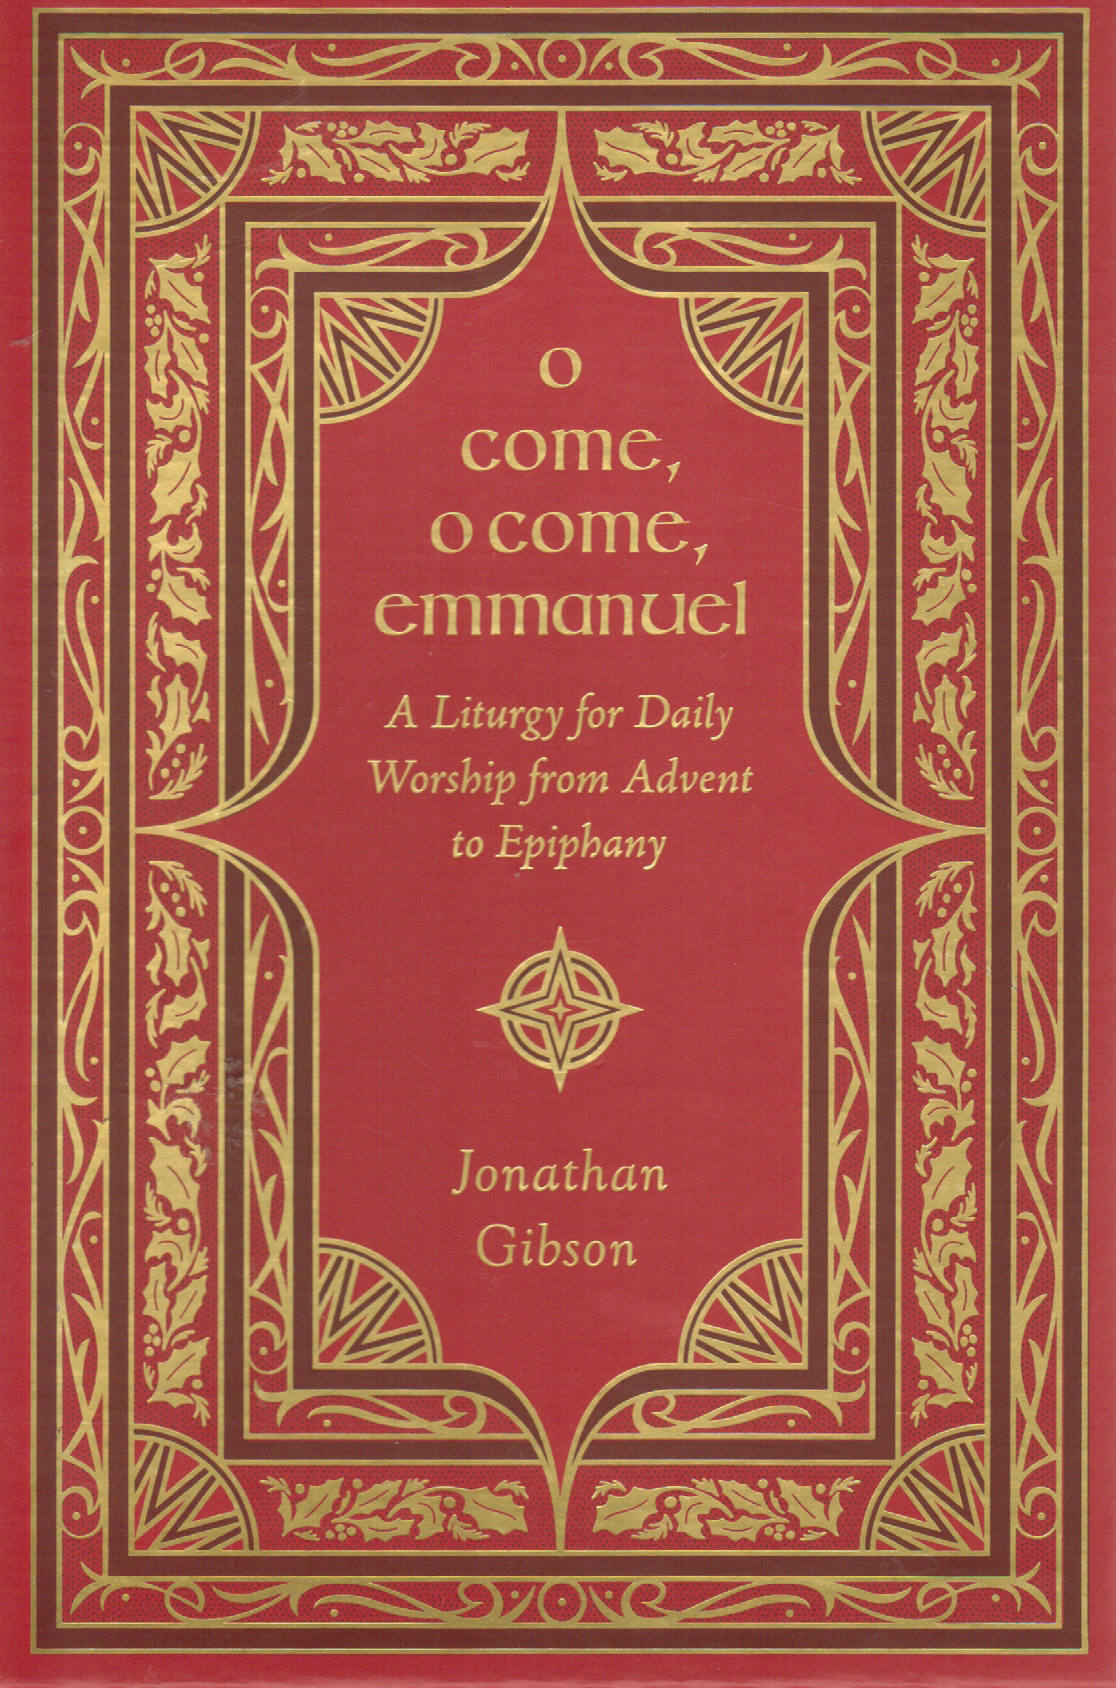 O Come, O Come, Emmanuel: A Liturgy for Daily Worship from Advent to Epiphany: Gibson, Jonathan: 9781433587948: Amazon.com: Books